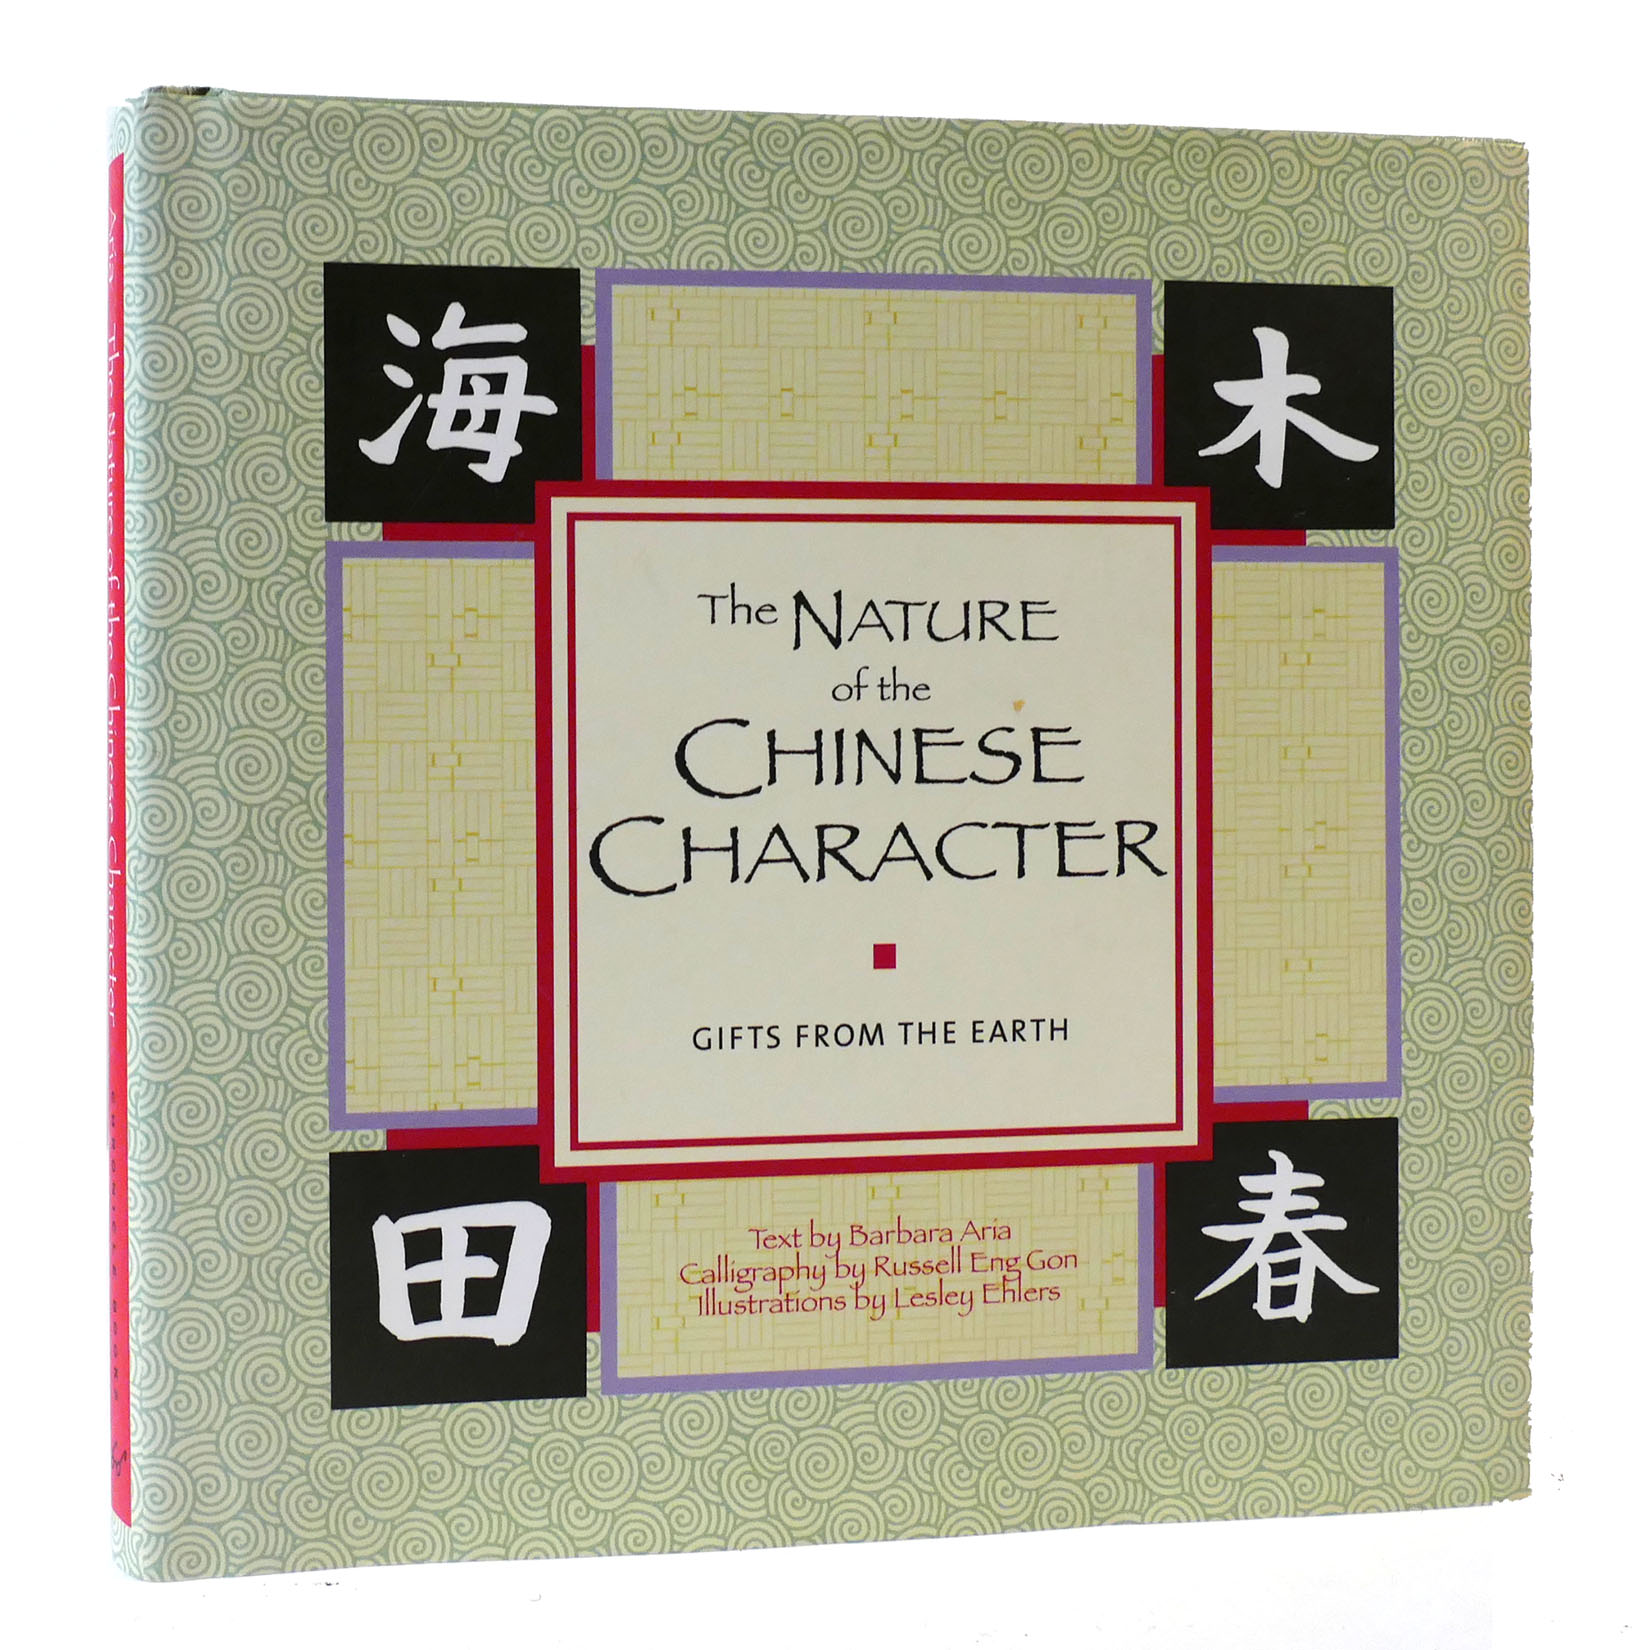 THE NATURE OF THE CHINESE CHARACTER: GIFTS FROM THE EARTH - Barbara Aria